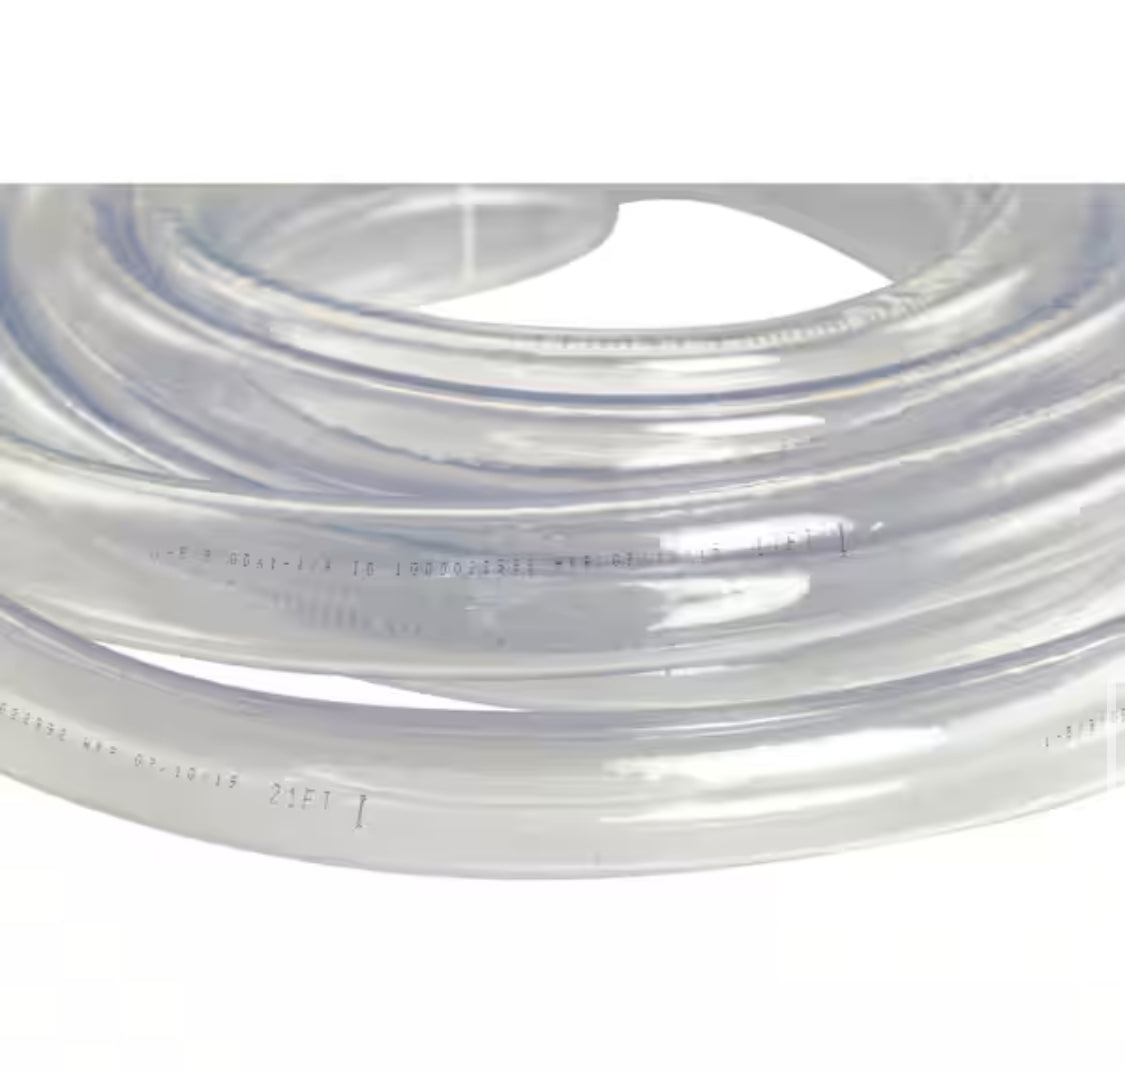 Everbilt 10 ft. I.D. x 1 in. O.D. x 1-1/4 in. Clear Vinyl Tubing